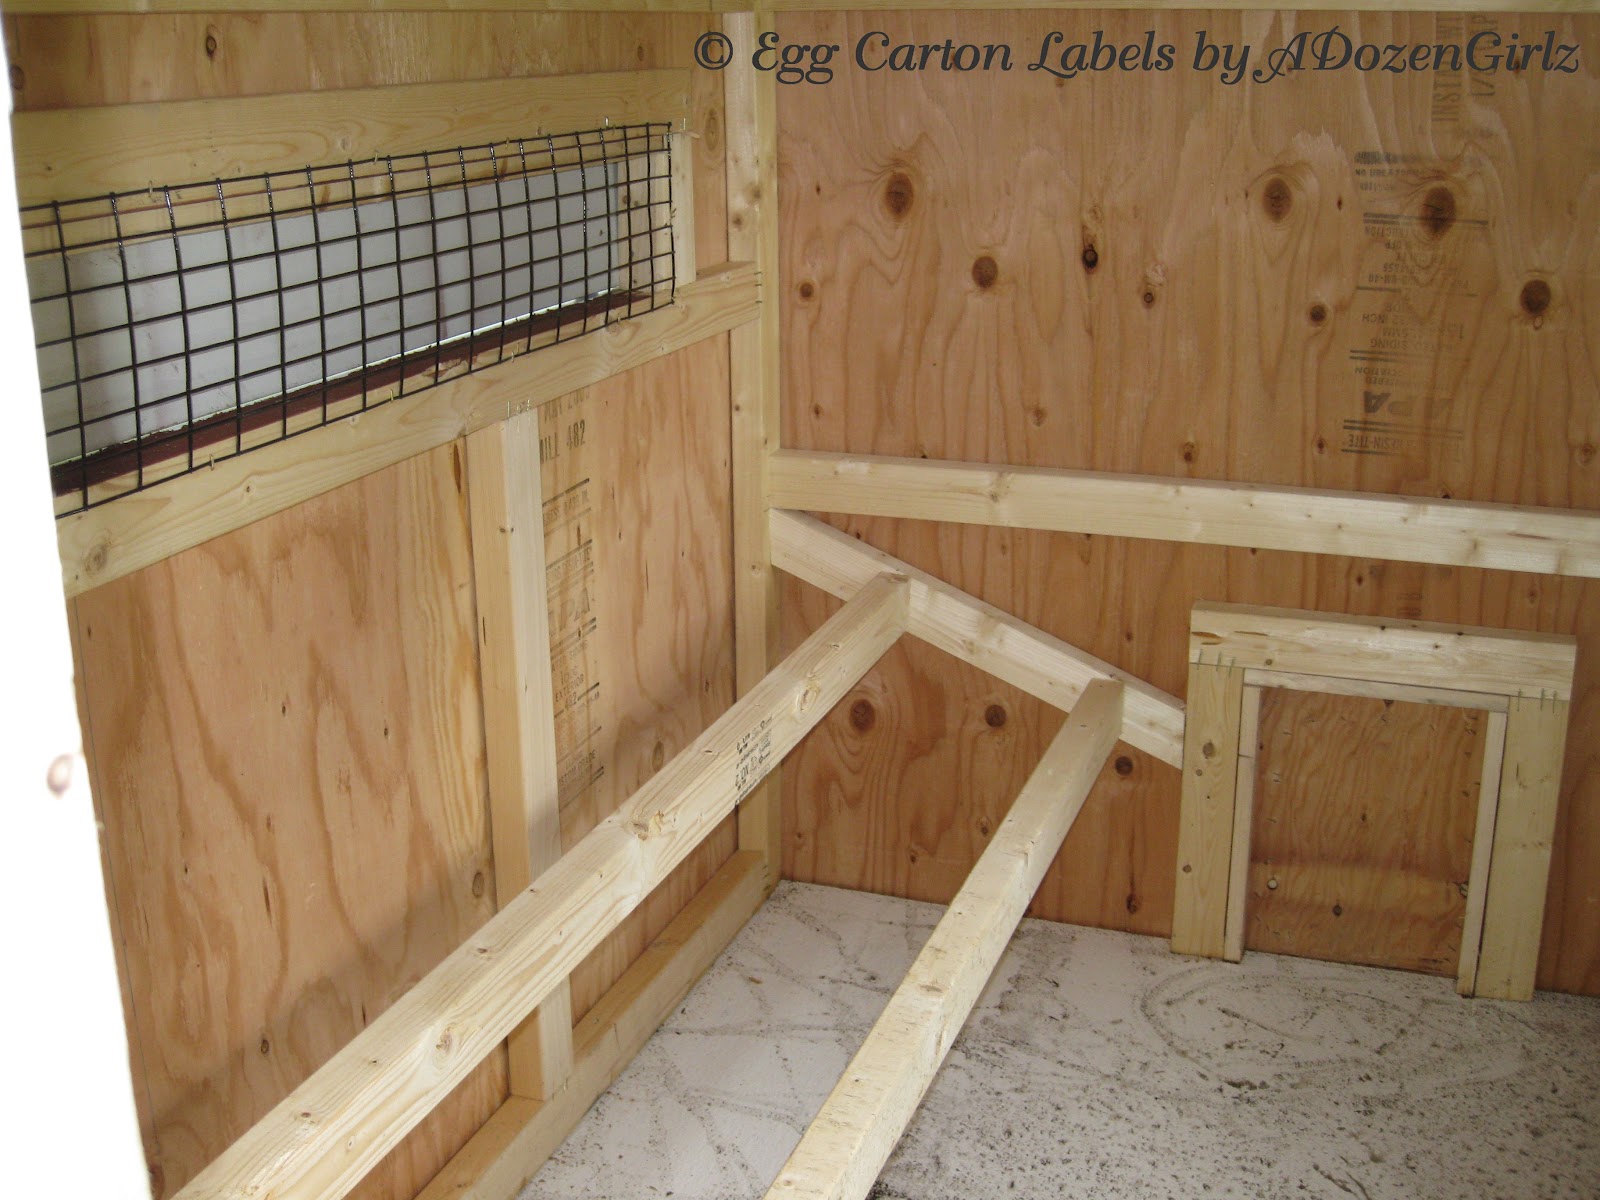 This was the state of my first chicken coop when it arrived.